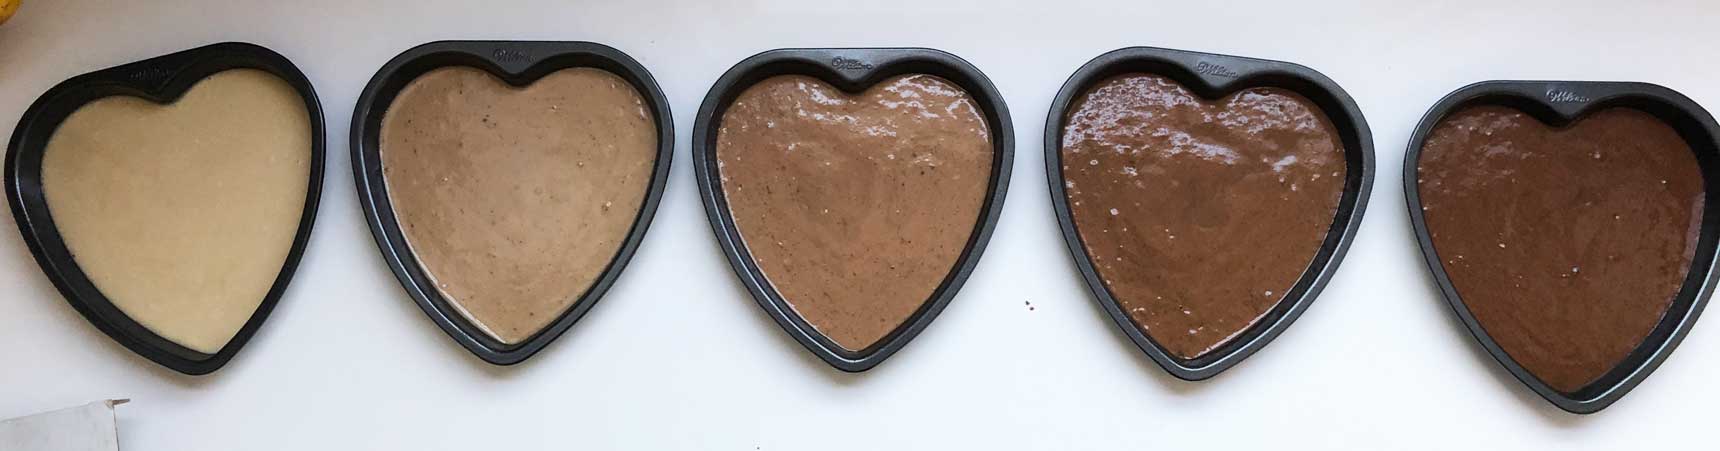 5 heart cake pans, filled and ready to go into the oven